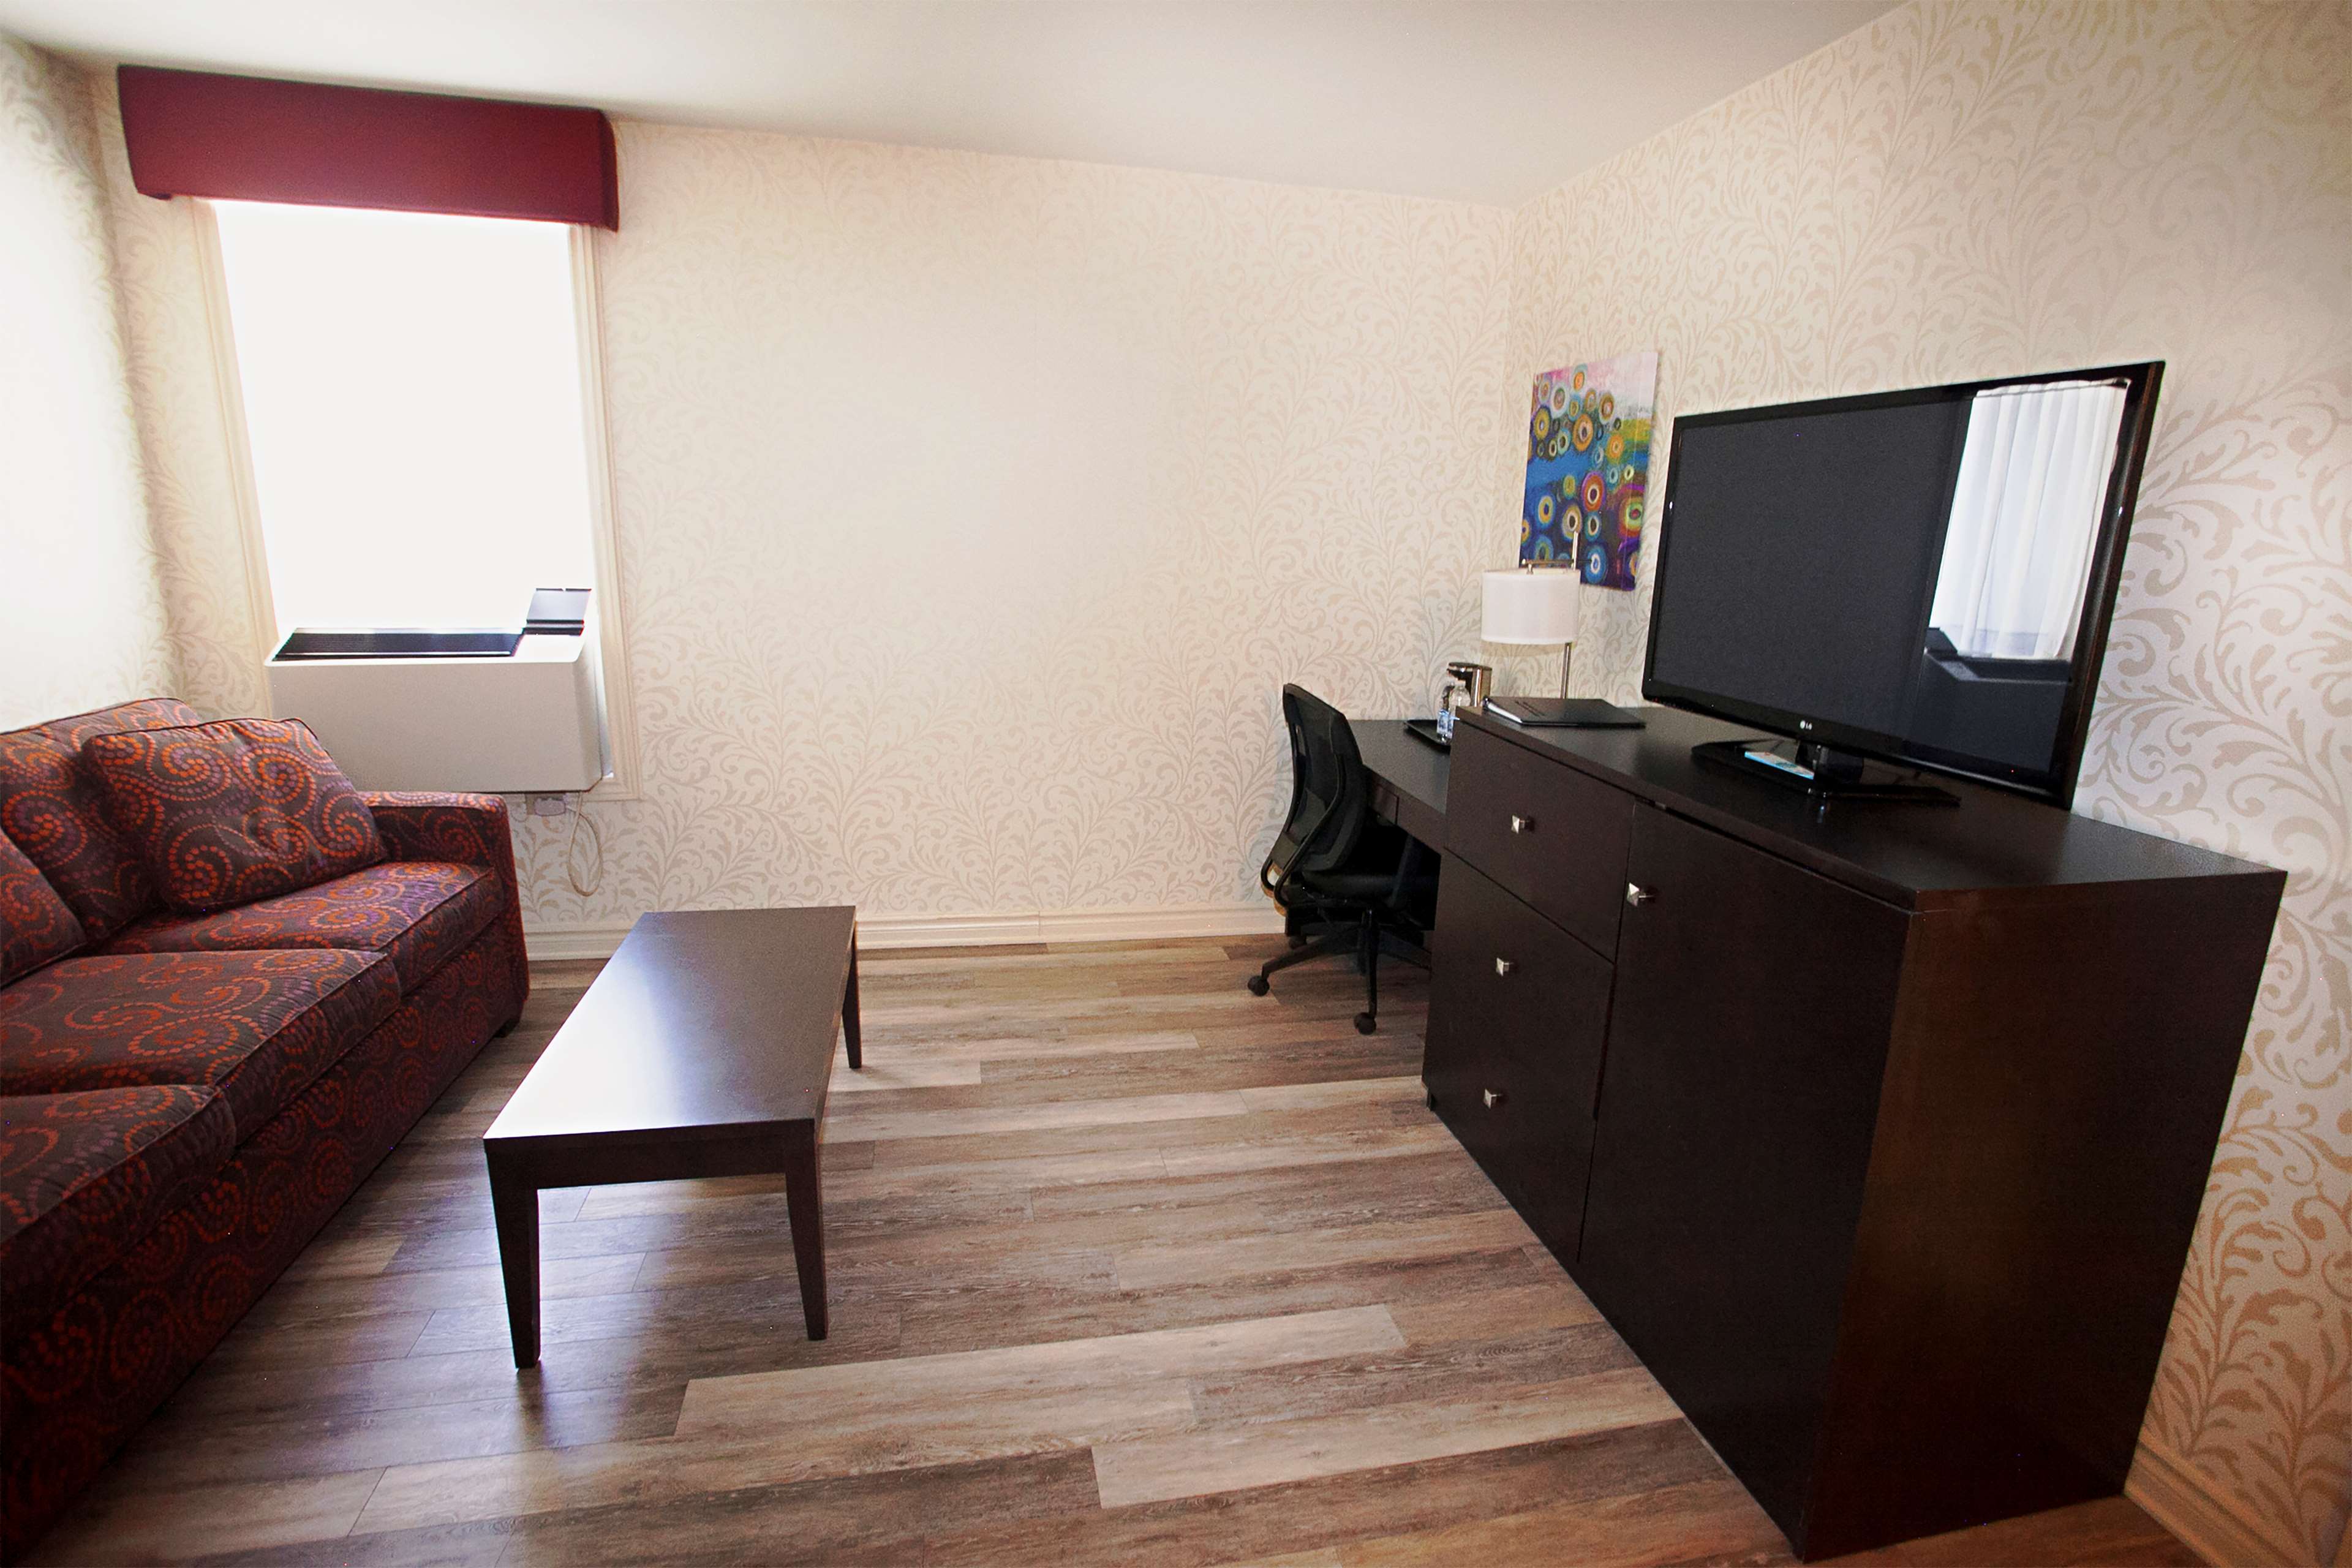 King Executive Guest Room Best Western Plus Montreal Downtown-Hotel Europa Montreal (514)866-6492